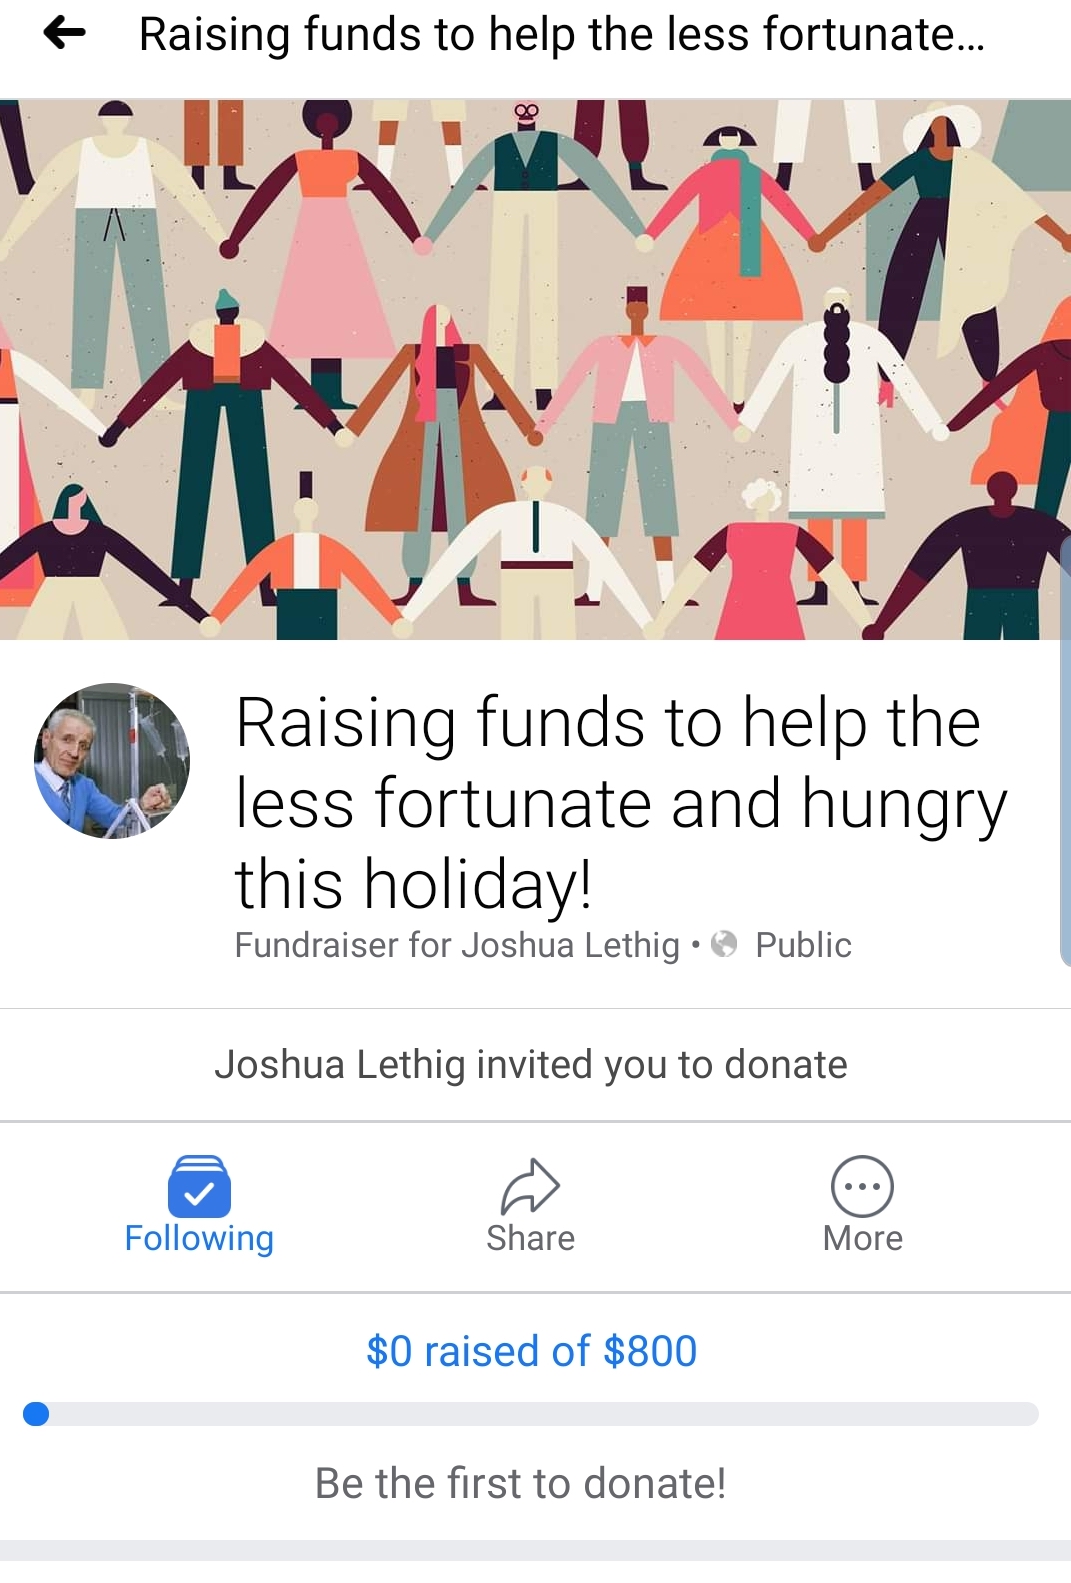 Fundraising - Raising funds to help the less fortunate... Raising funds to help the less fortunate and hungry this holiday! Fundraiser for Joshua Lethige Public Joshua Lethig invited you to donate ing More $0 raised of $800 Be the first to donate!